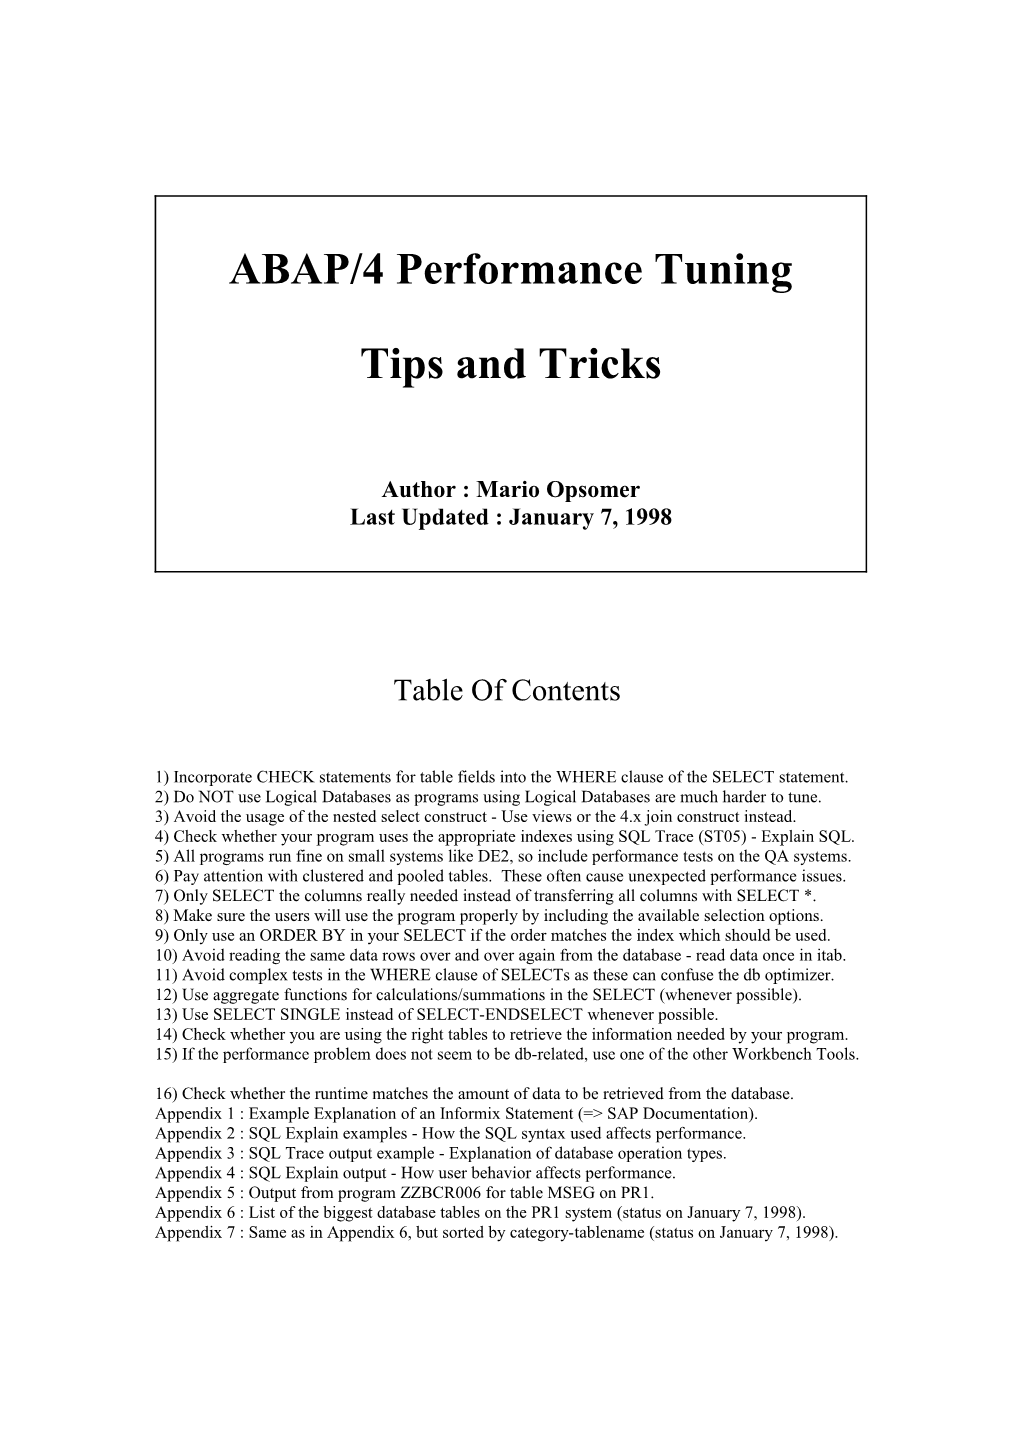 ABAP/4 Performance Tuning : Tips and Tricks